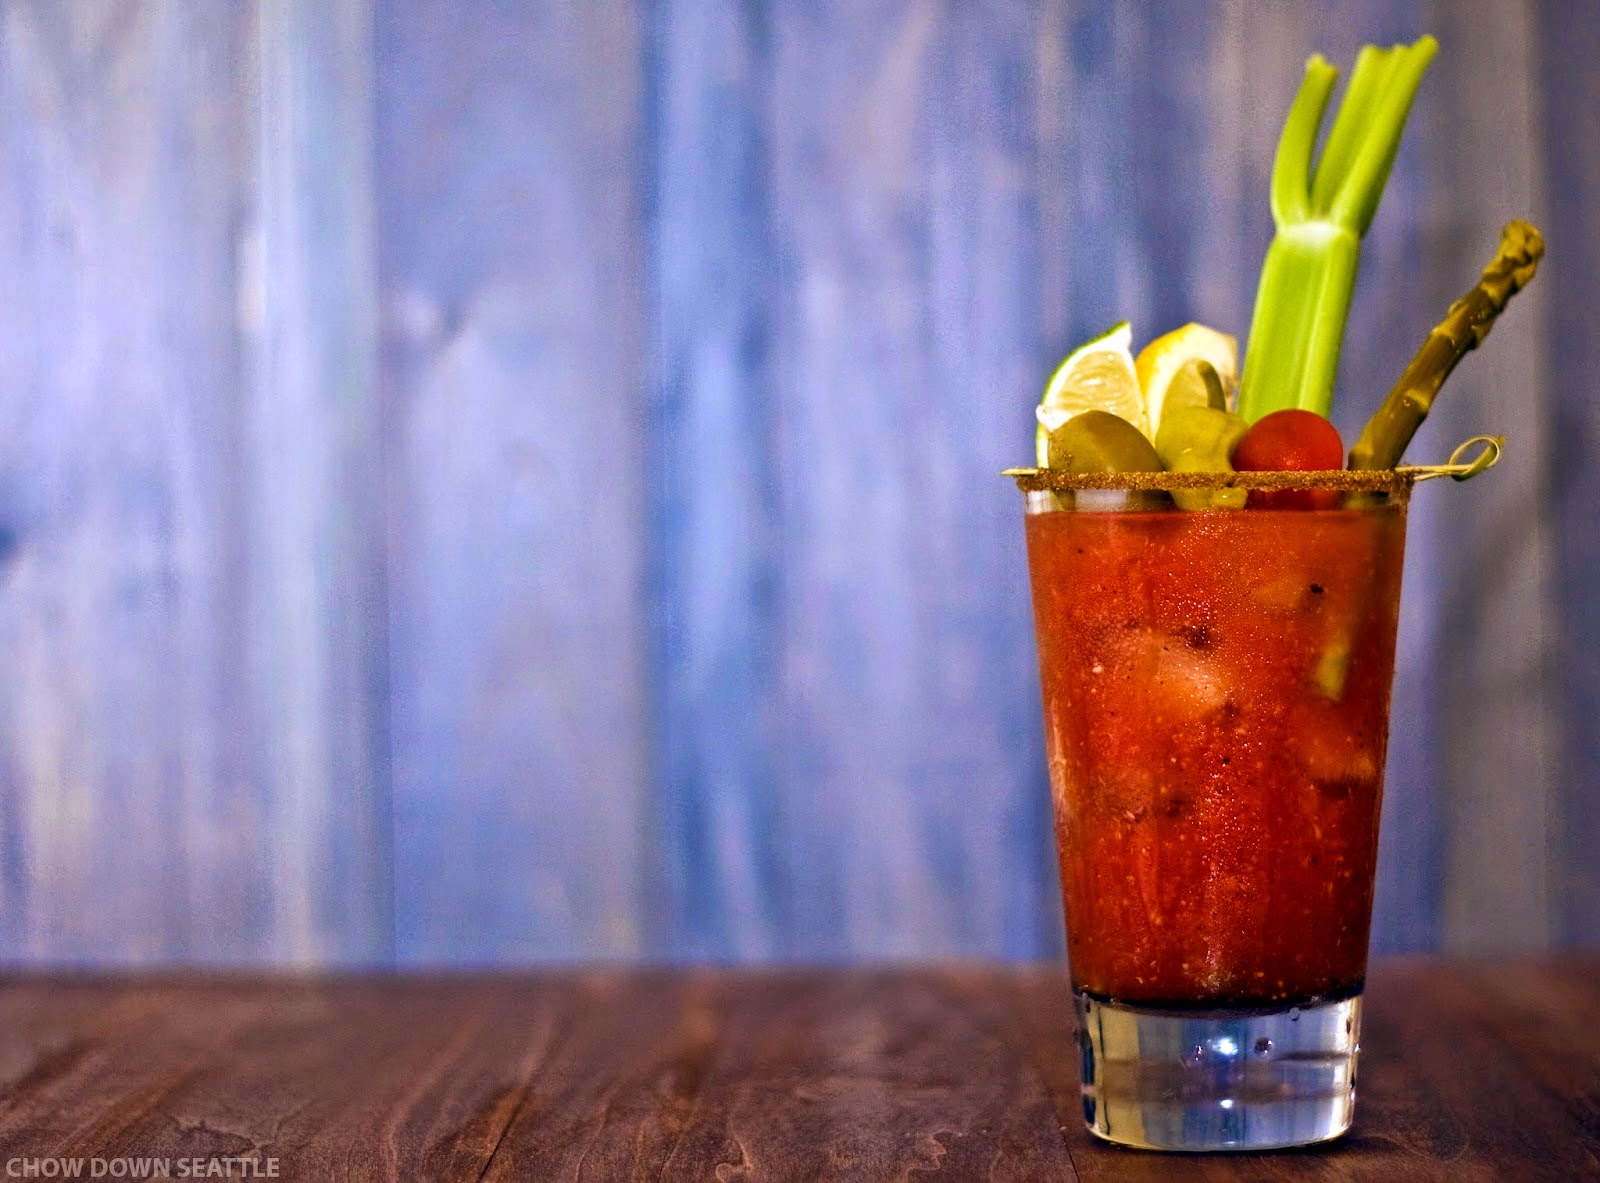 http://www.chowdownseattle.com/2014/08/drinks-classic-bloody-mary.html#uds-search-results